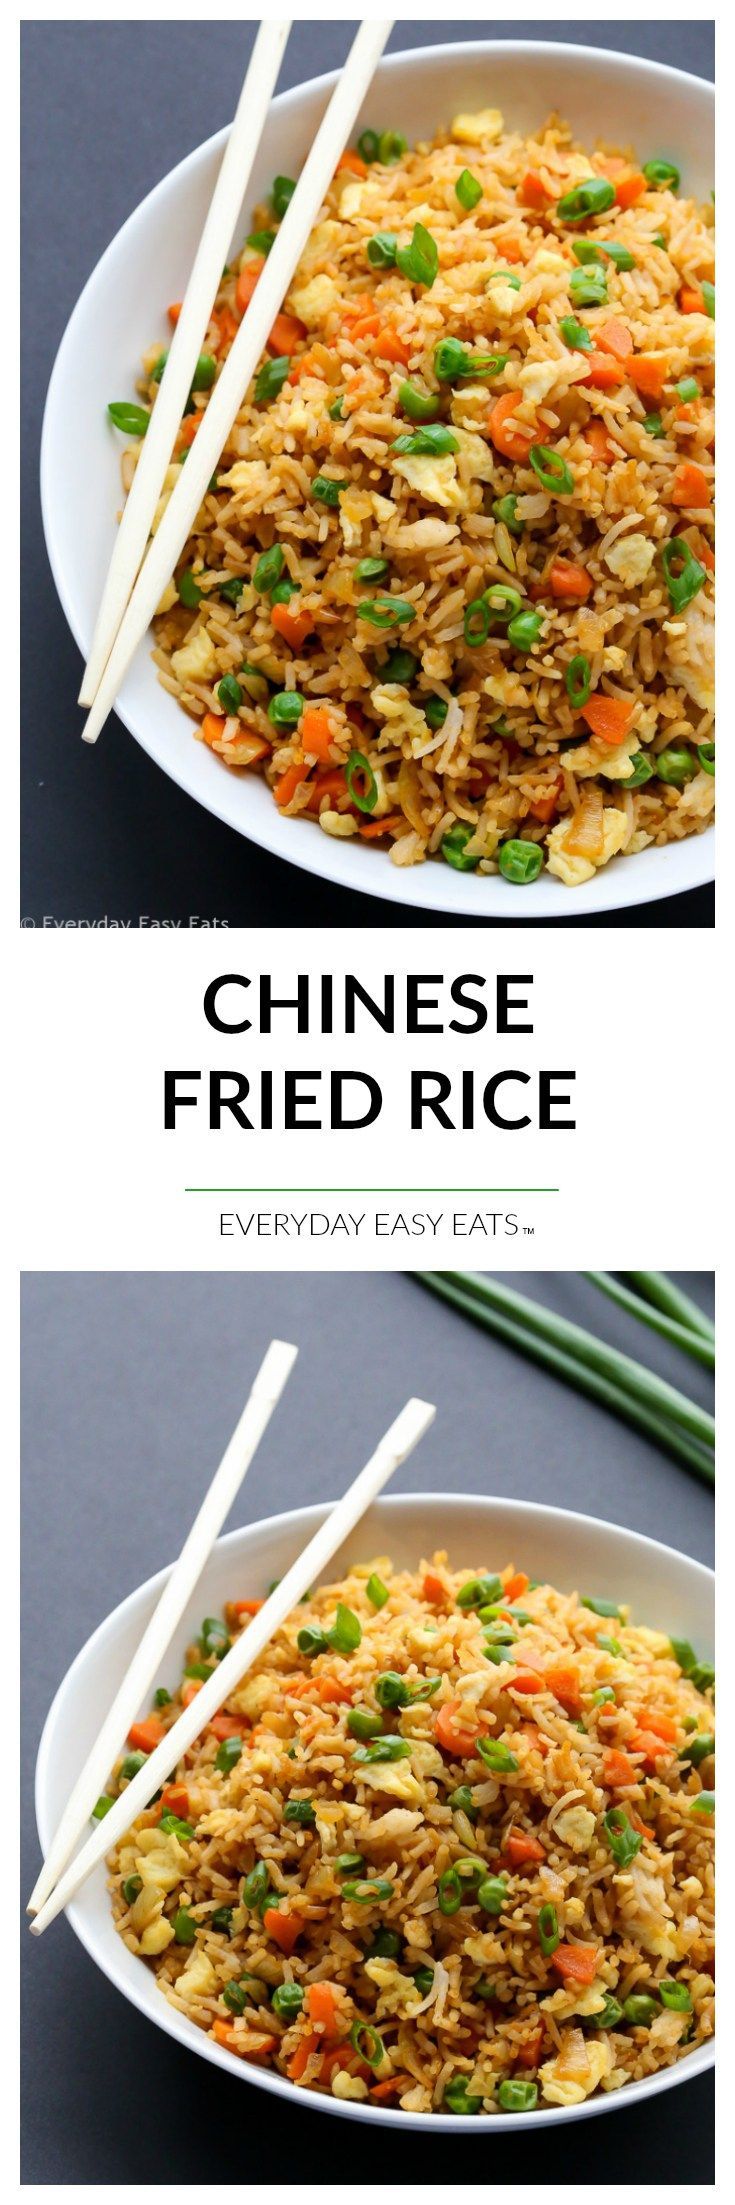 Chinese Fried Rice – 15-minute vegetarian fried rice. A healthy, flavorful and satisfying side dish or main. |